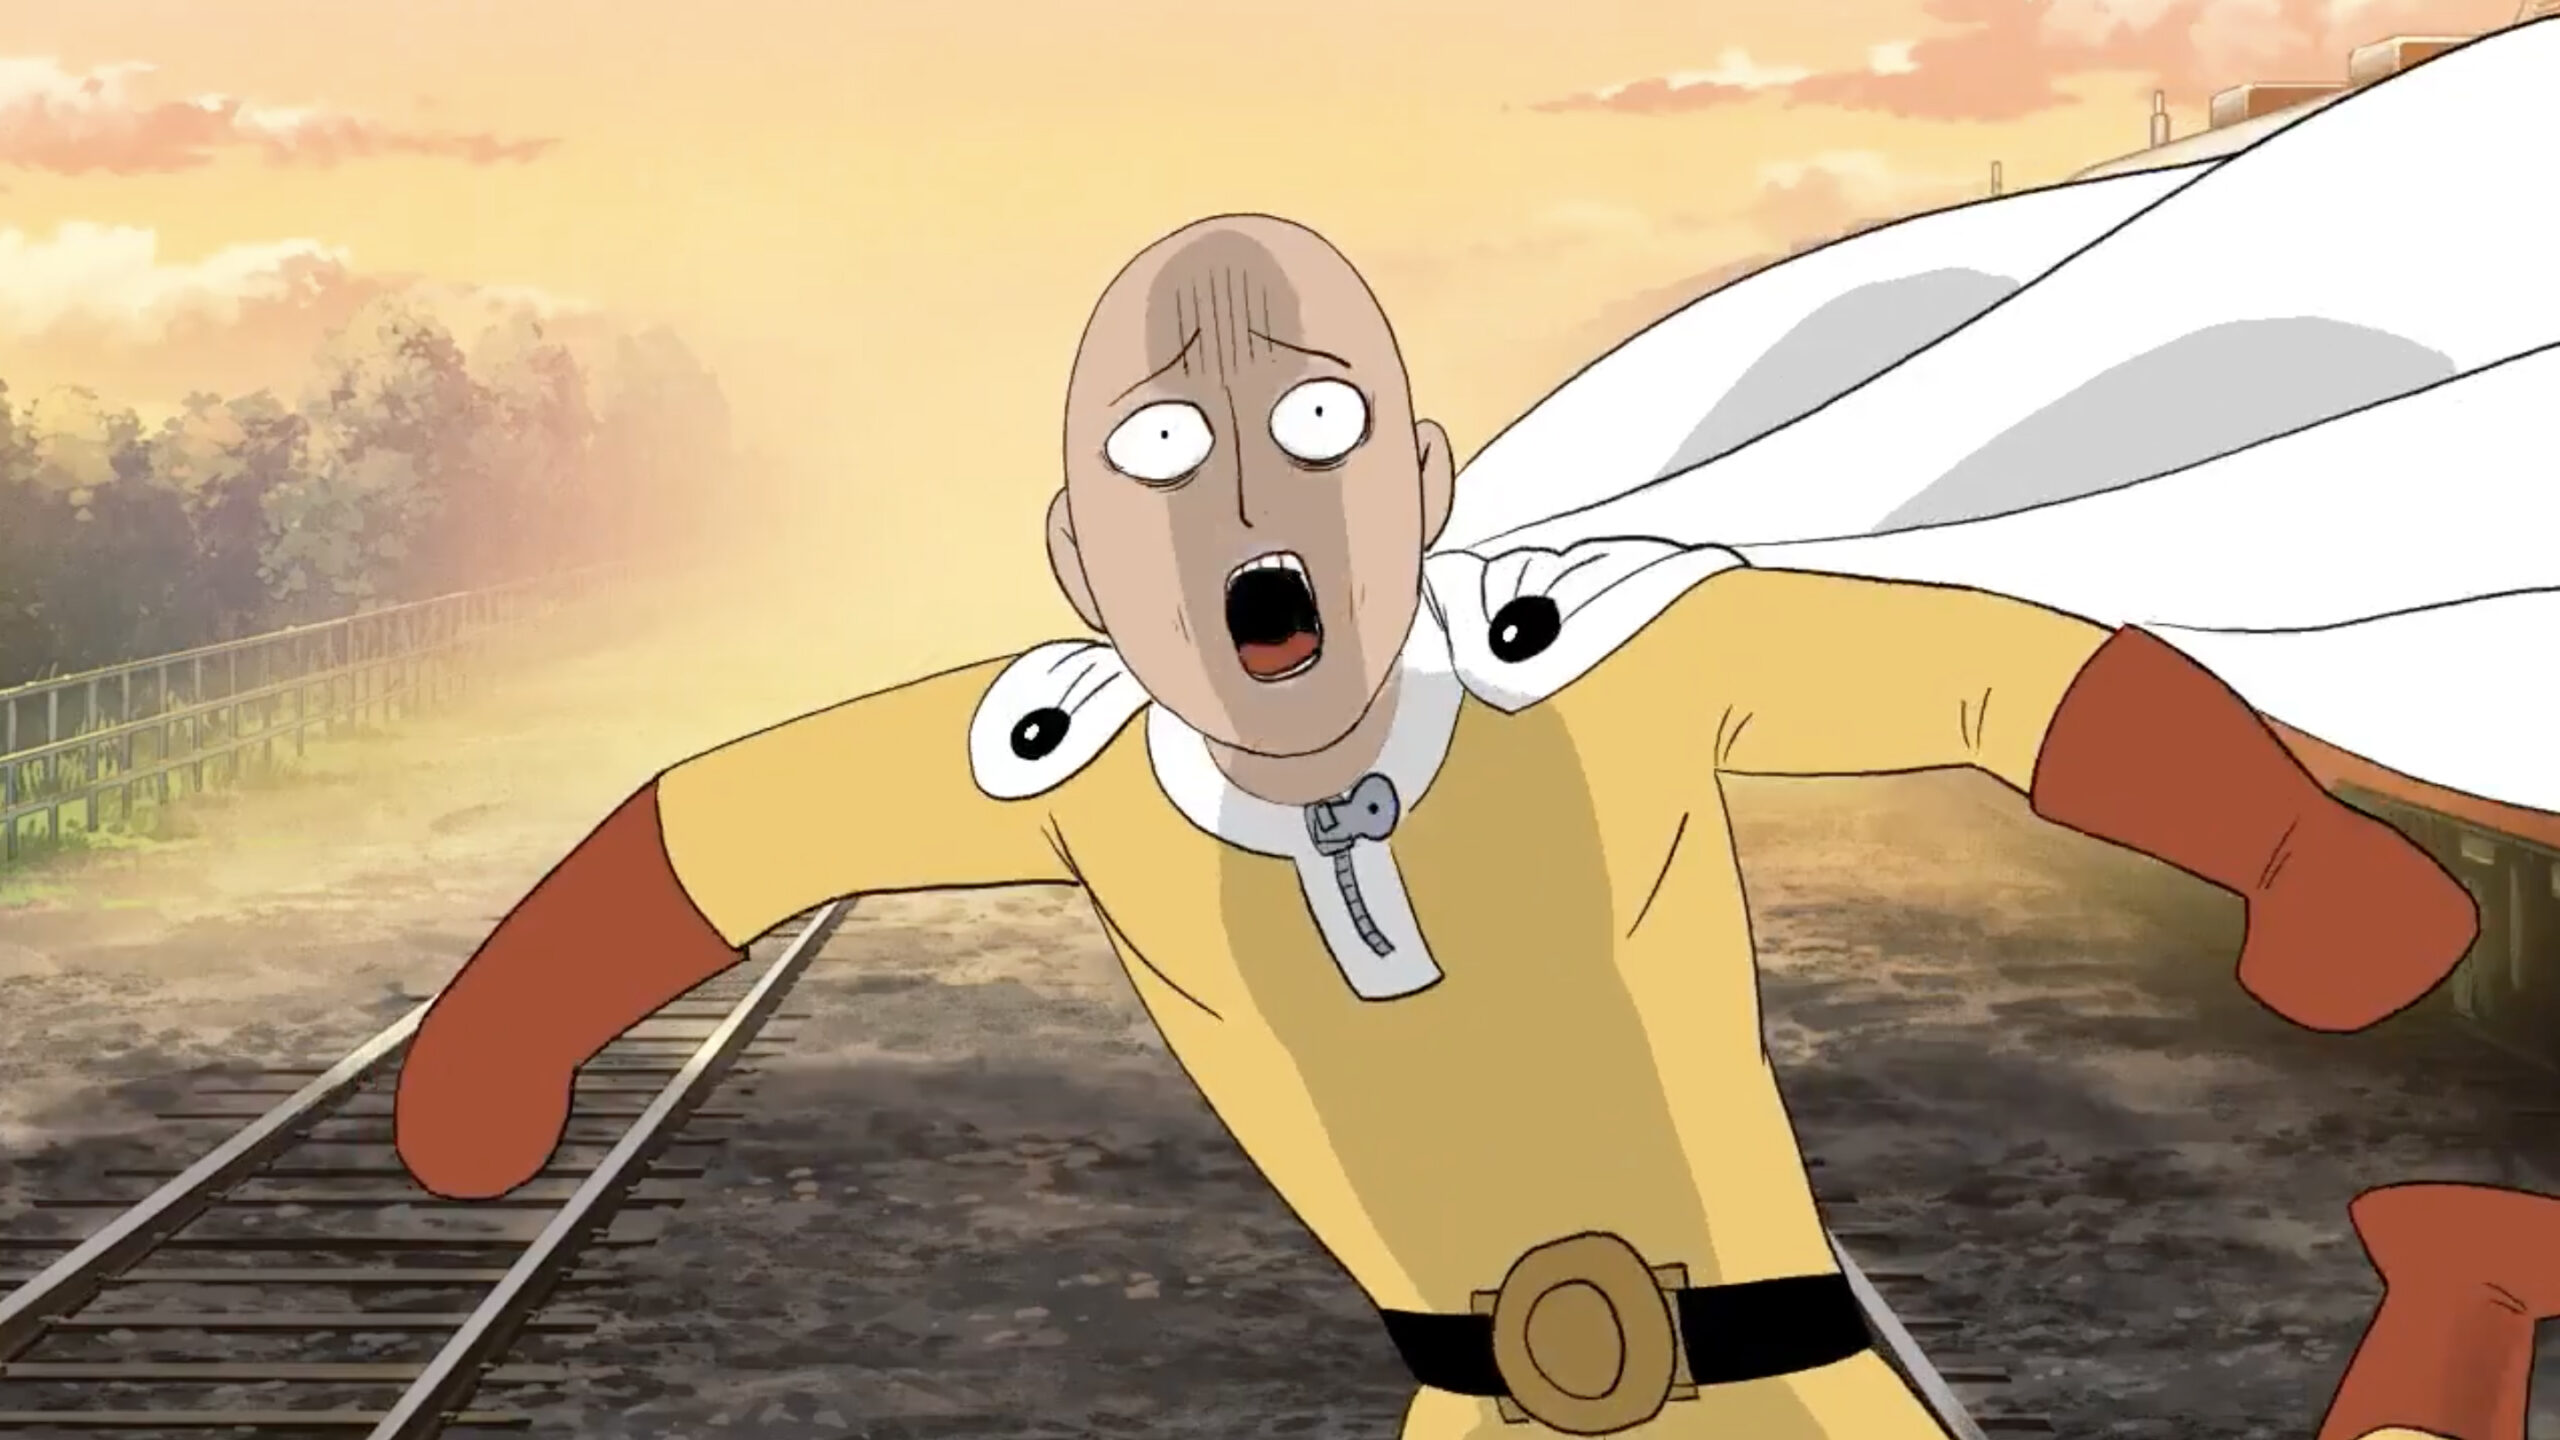 Saitama in a special side story